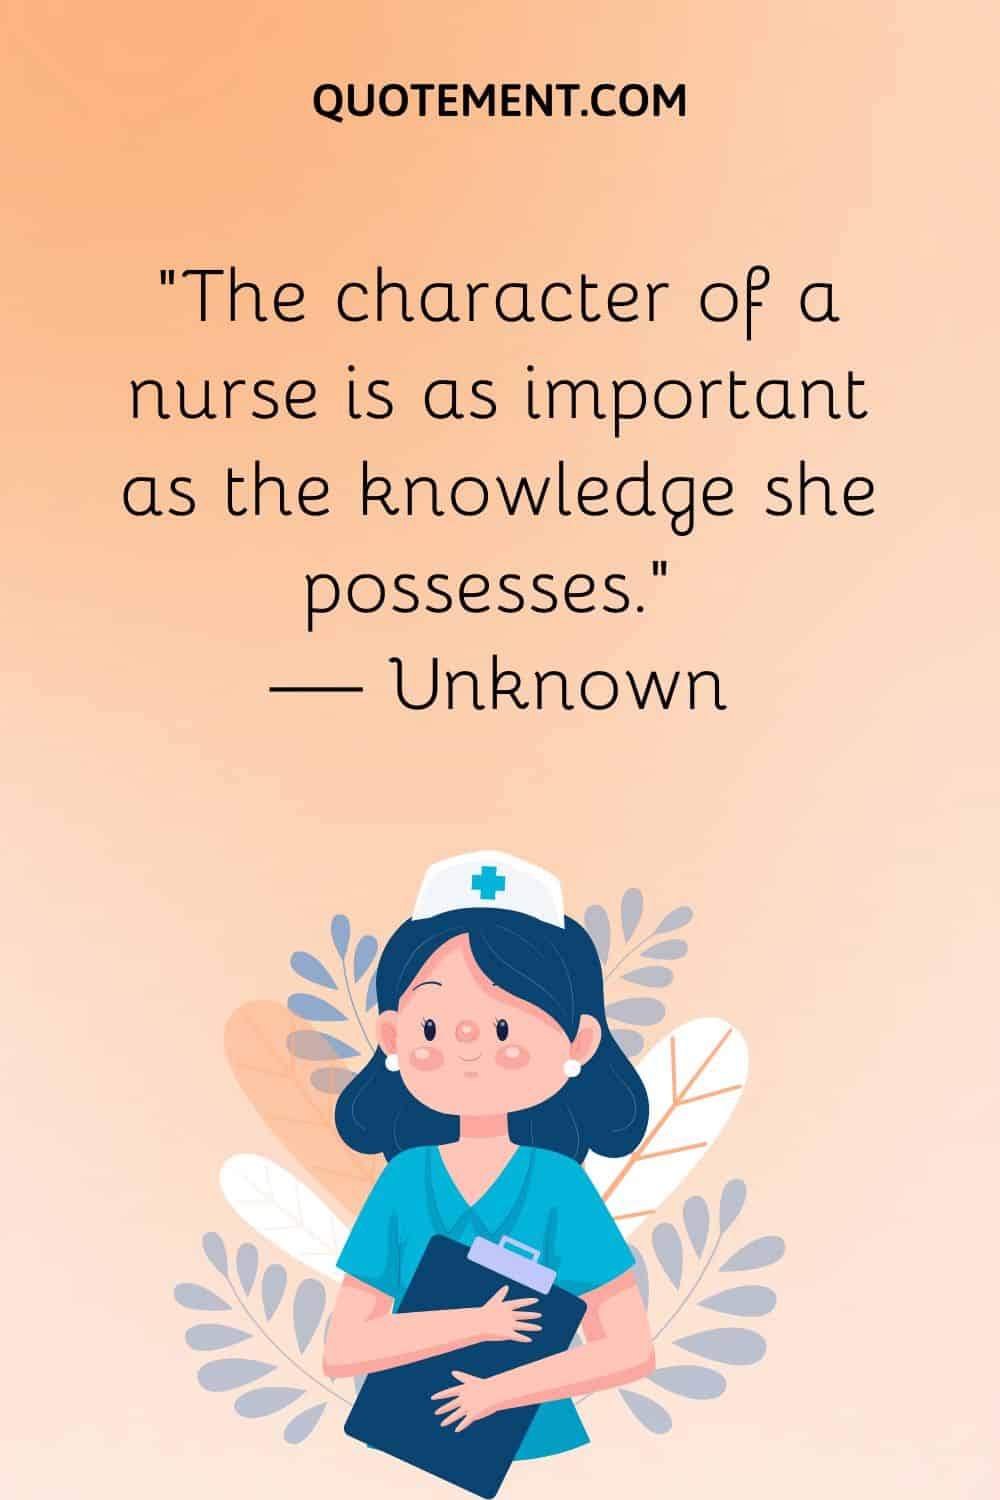 “The character of a nurse is as important as the knowledge she possesses.” — Unknown